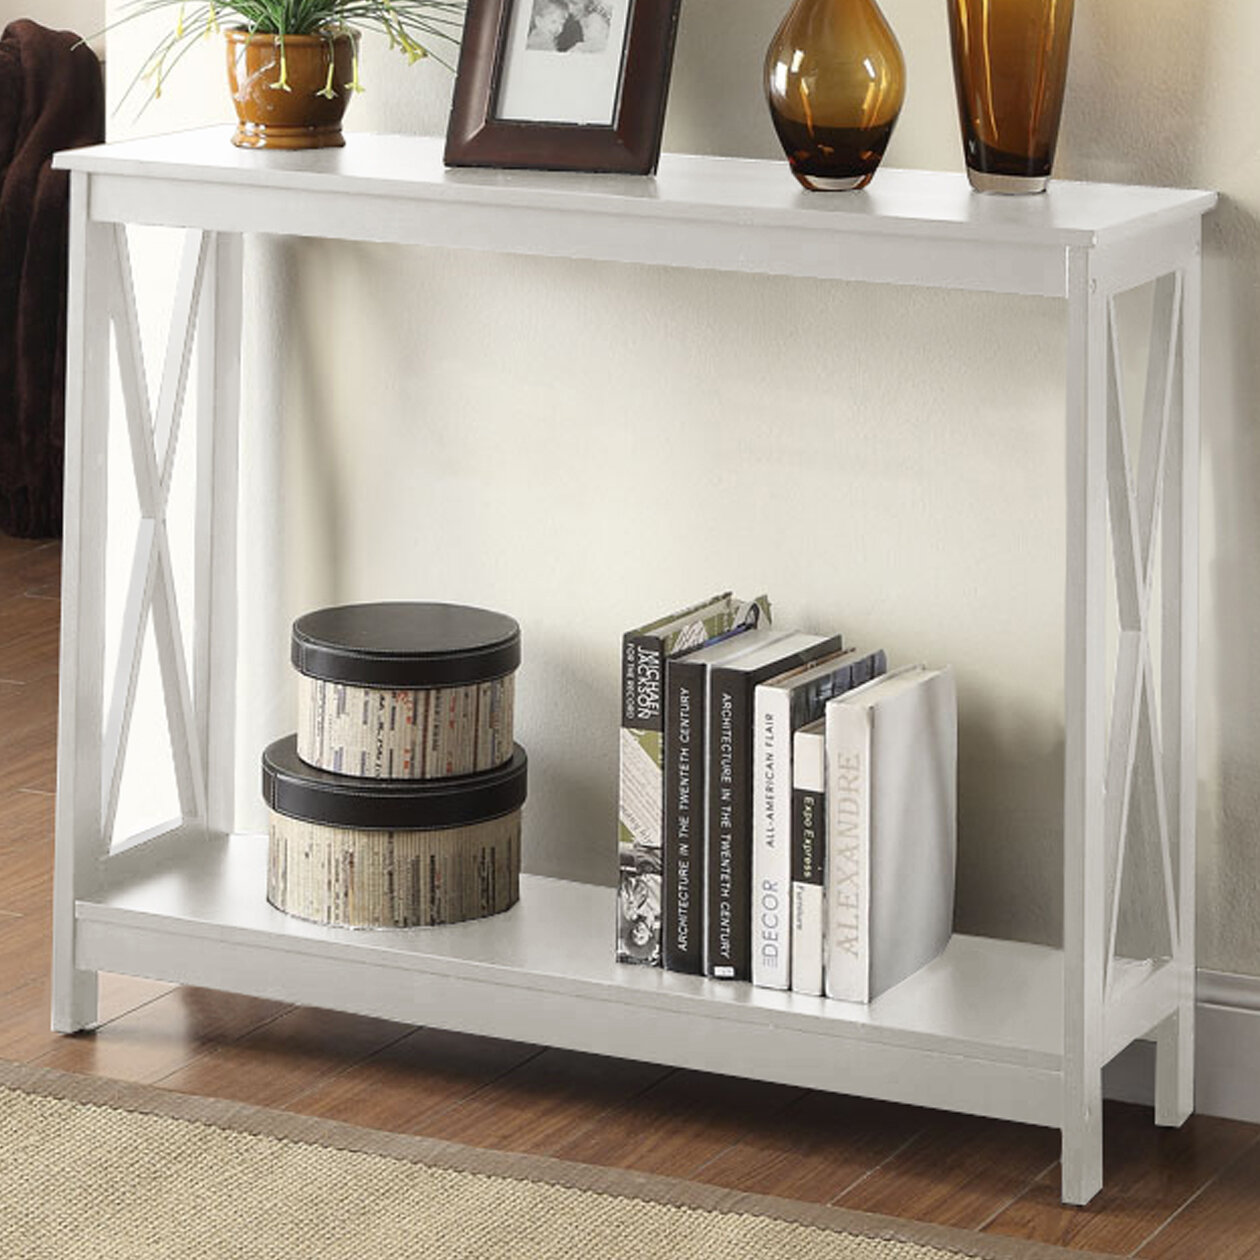 Details about   White Hall Table Furniture Hallway Cabinet Entry Side Console Stand Storage M1 